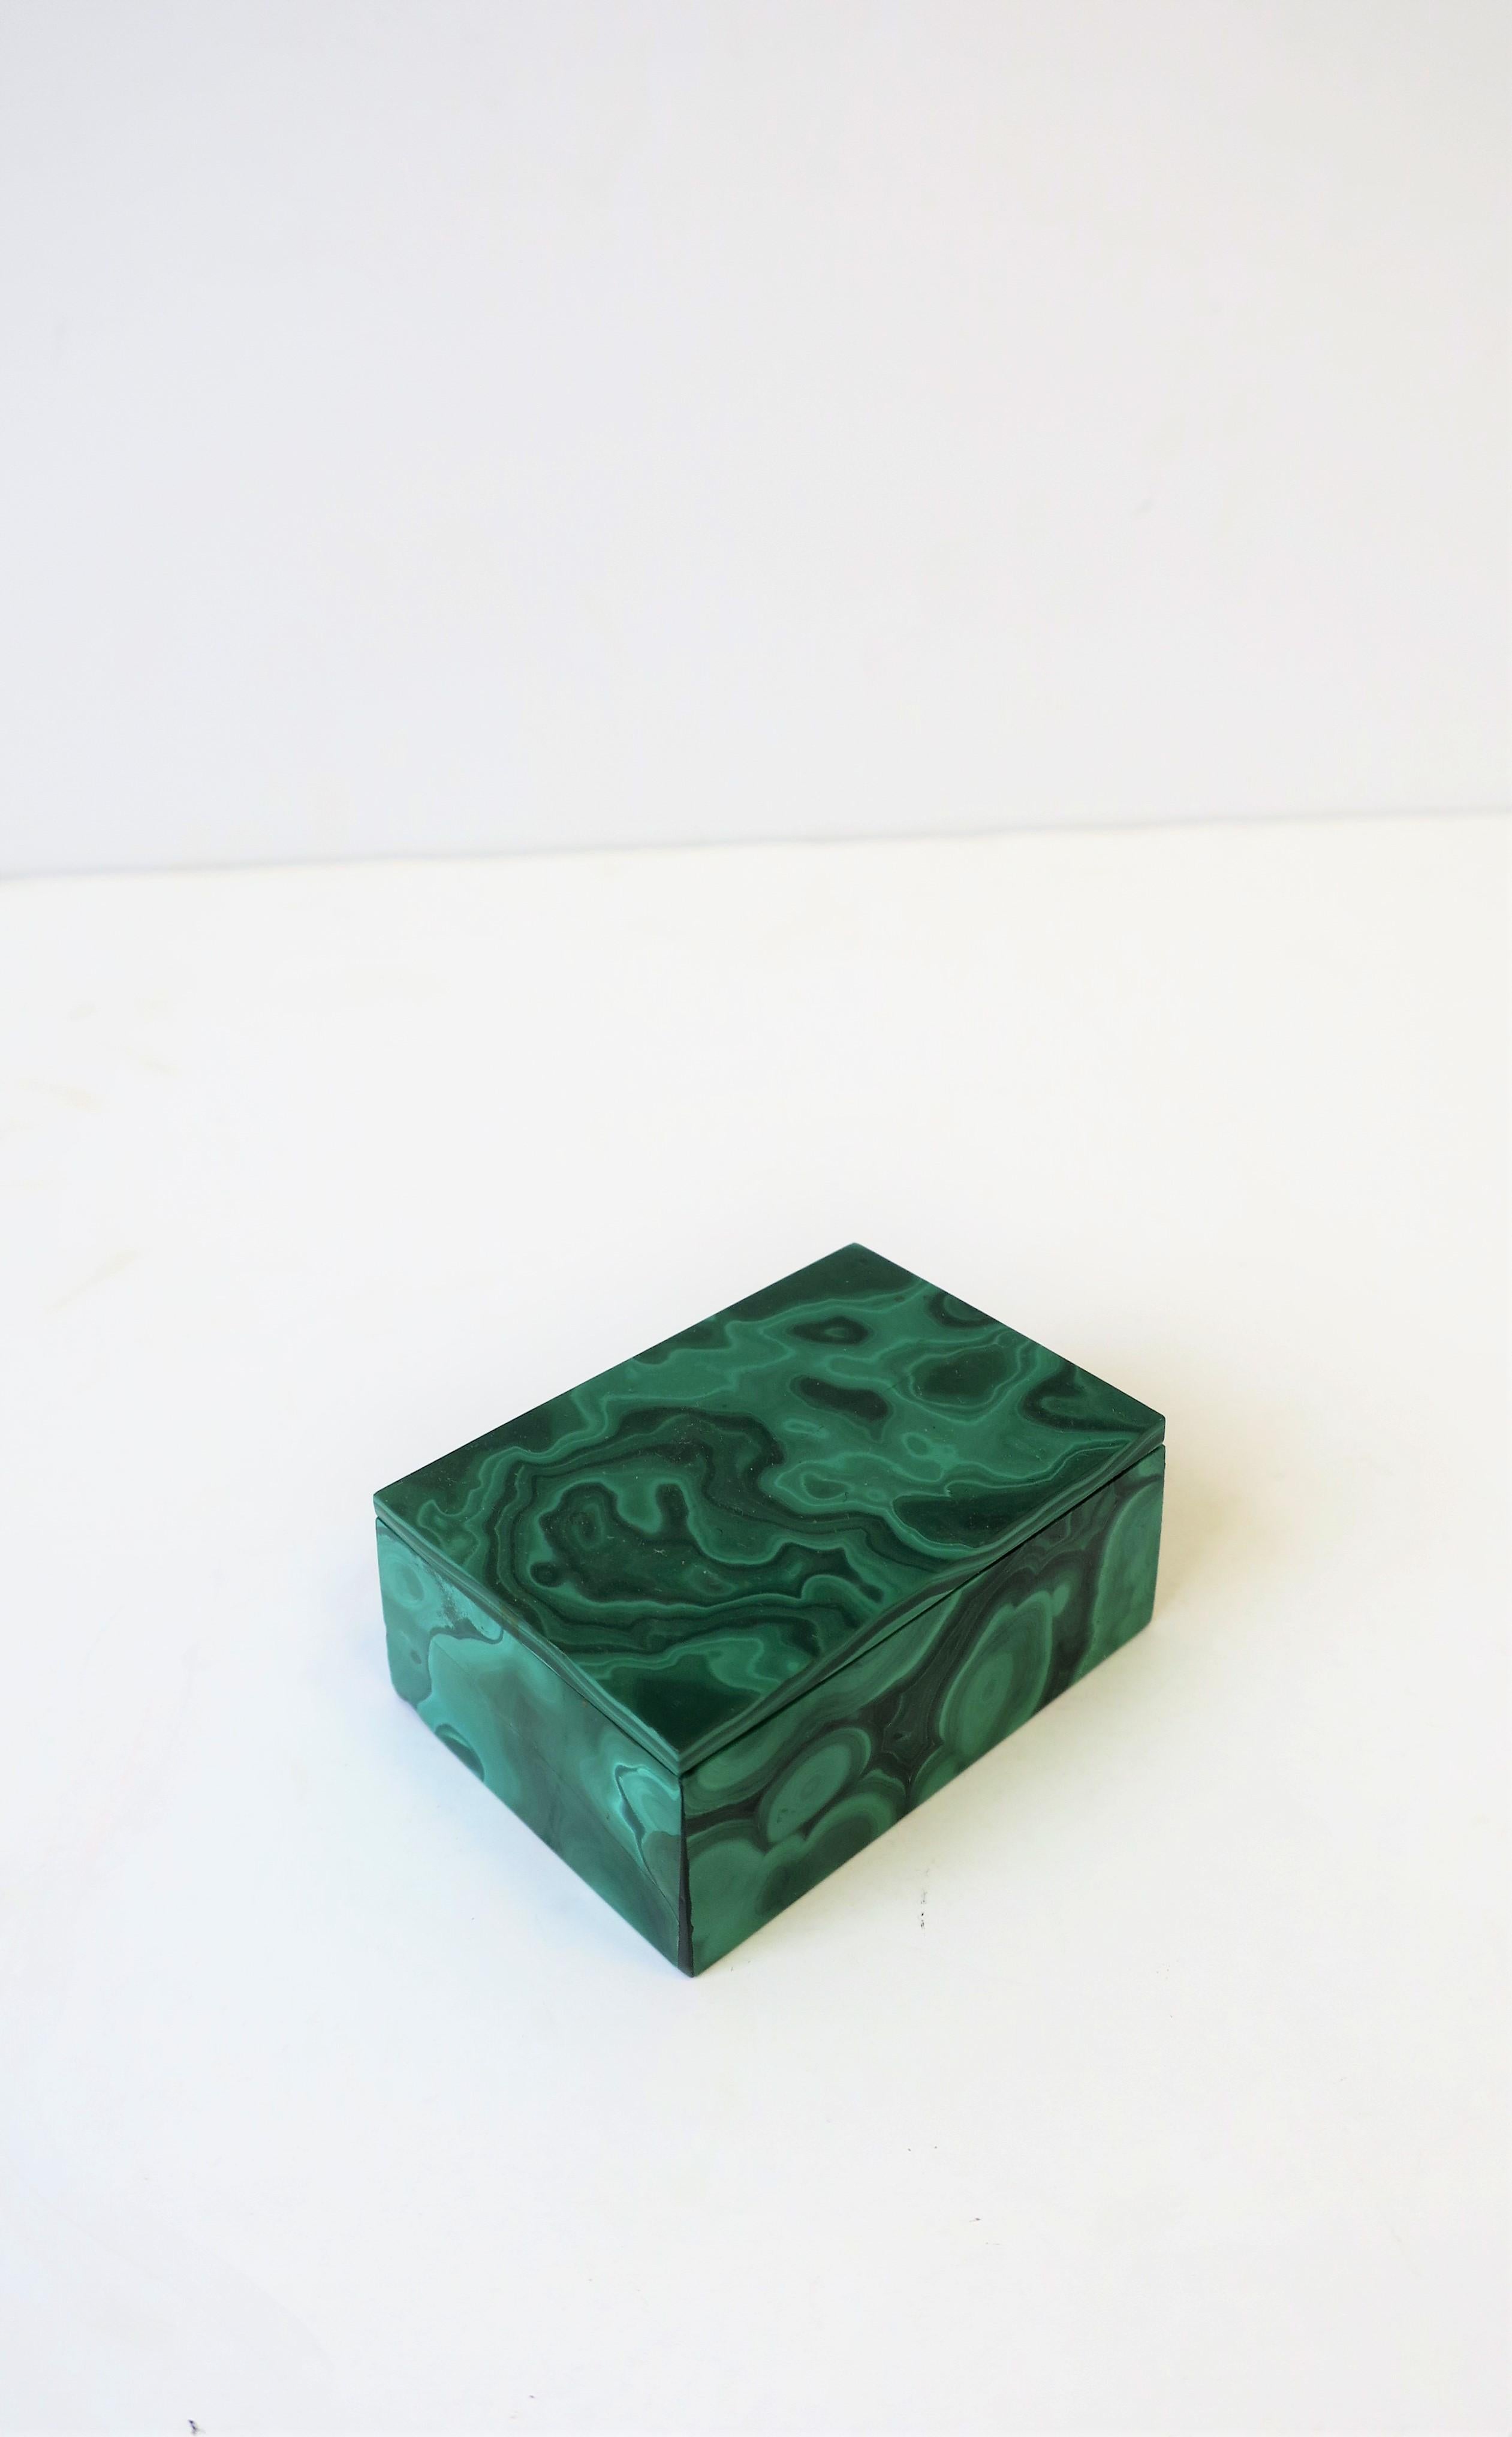 A beautiful small vintage green Malachite box. Box can hold jewelry (as demonstrated) or other small items. 

Box measures: 1.75